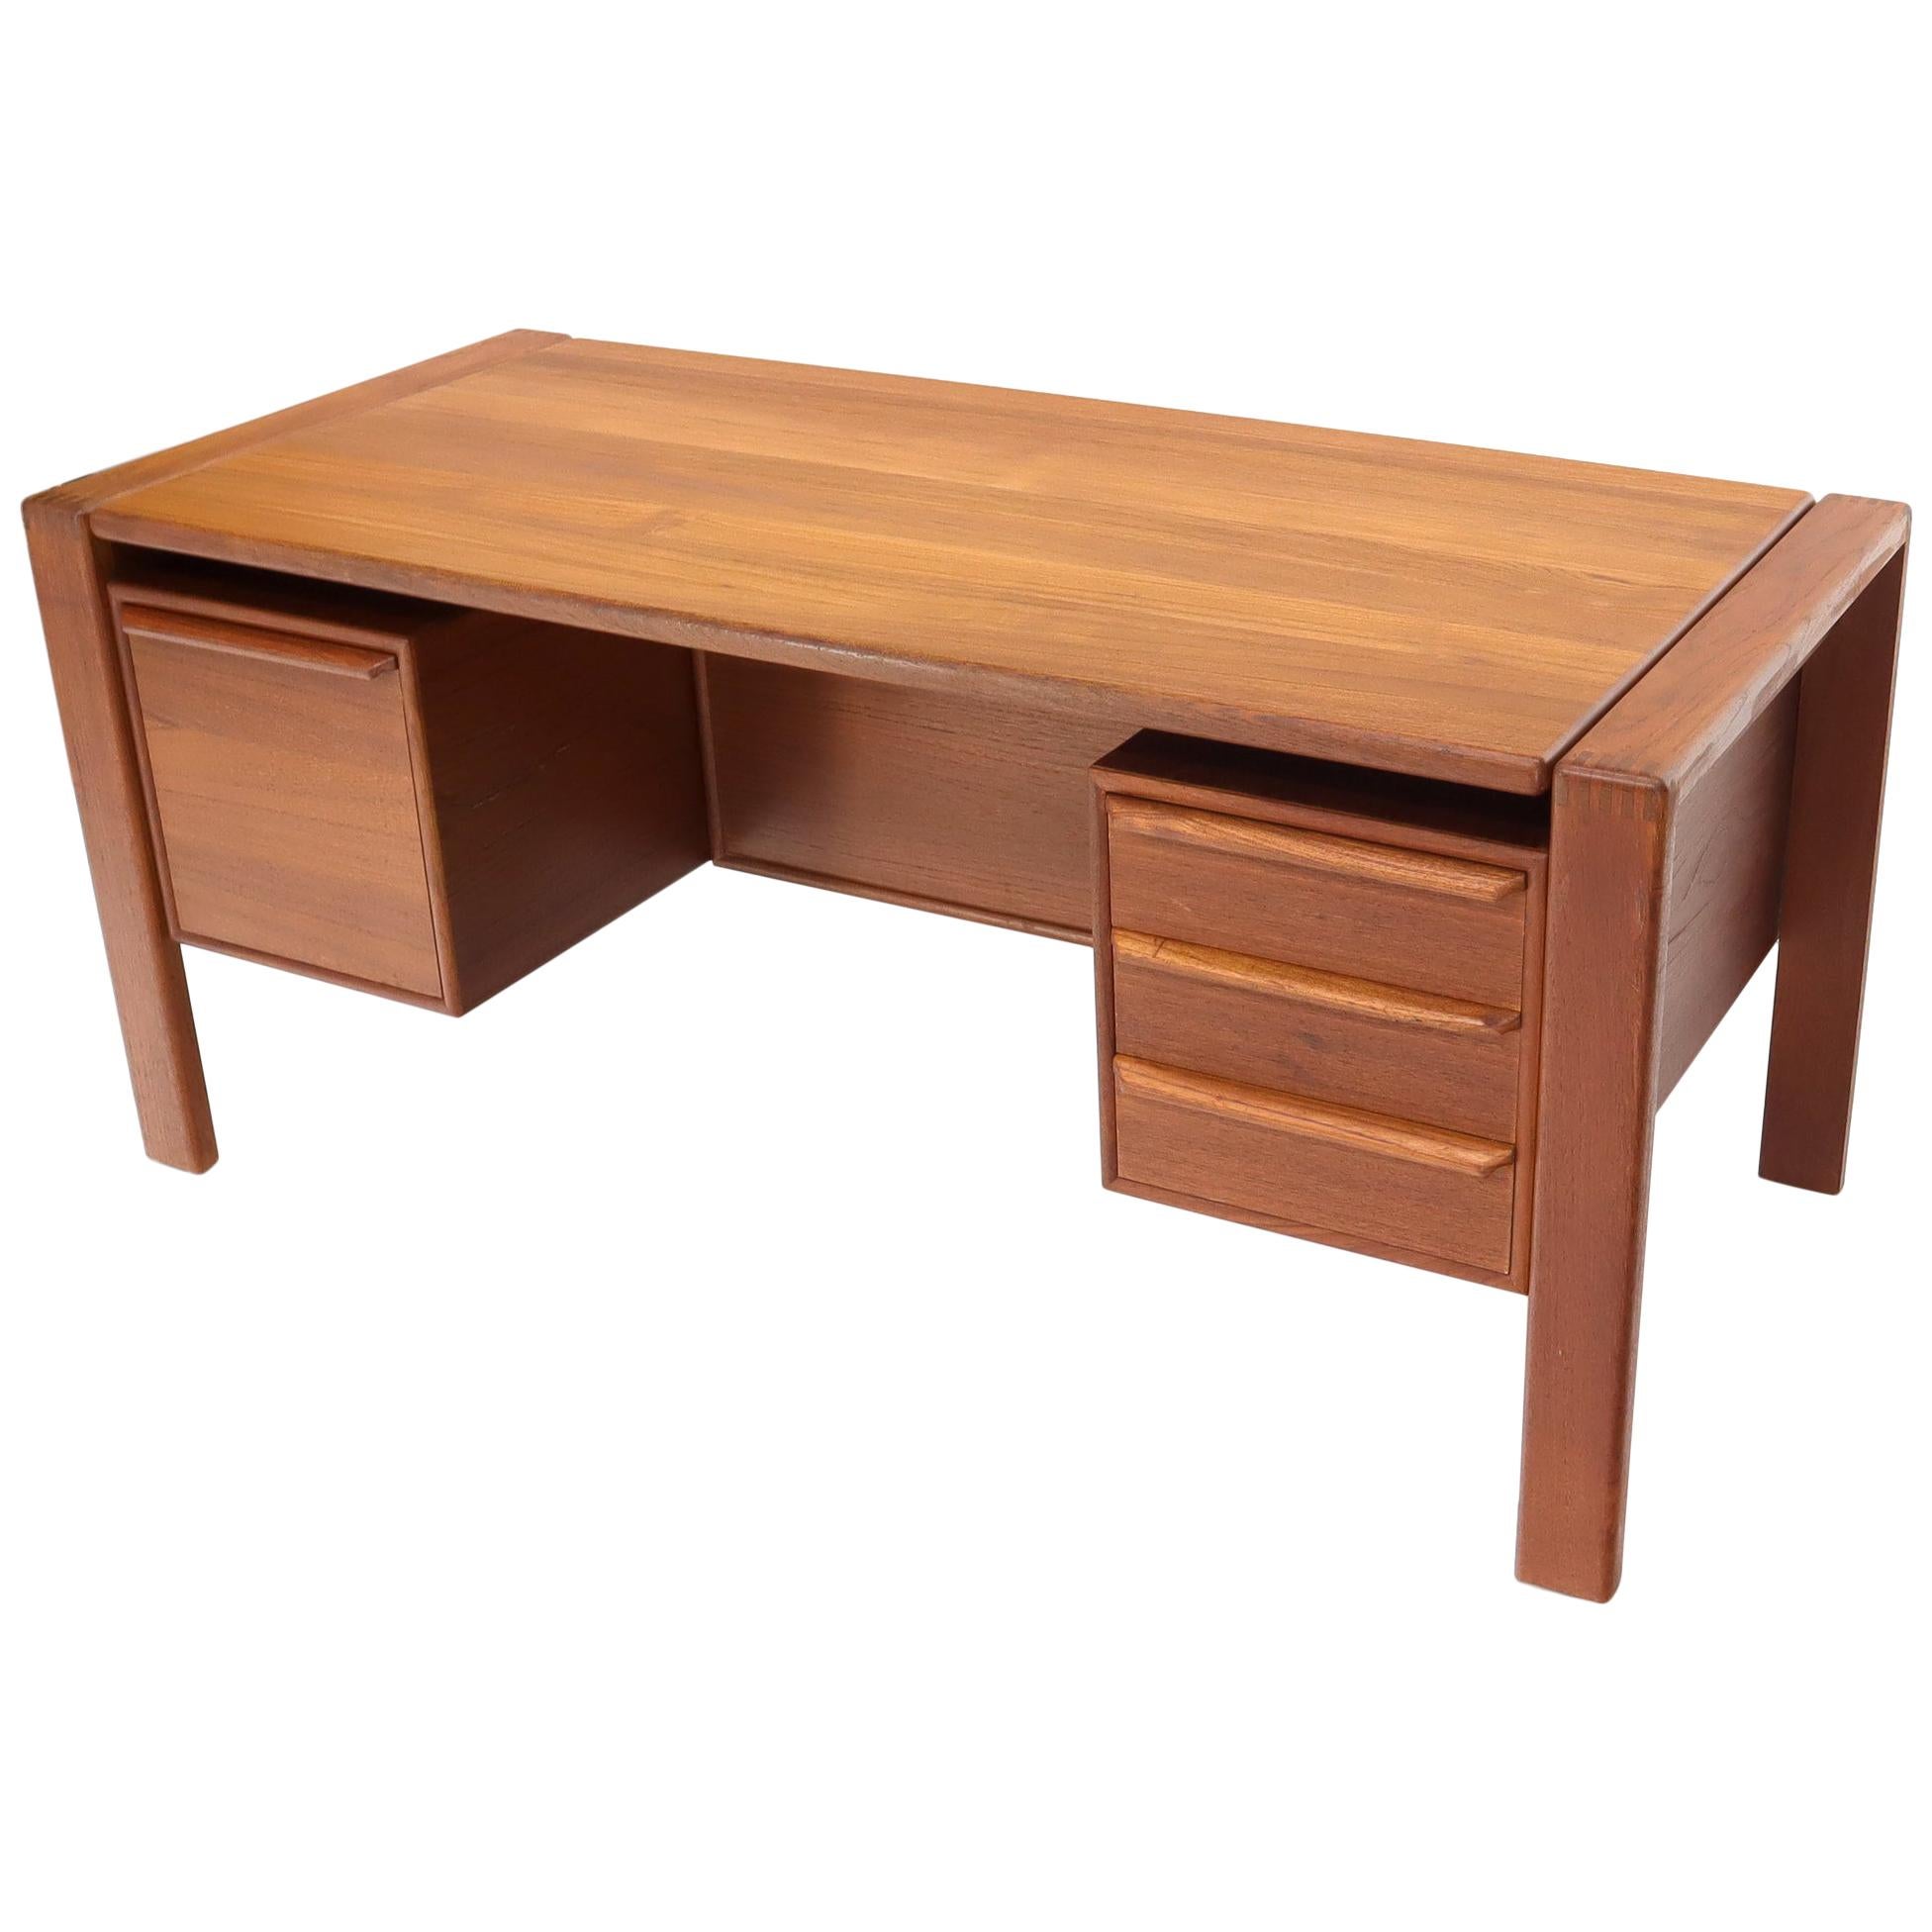 Executive Solid Teak Midcentury Danish Modern Desk with Bookcase and File Drawer